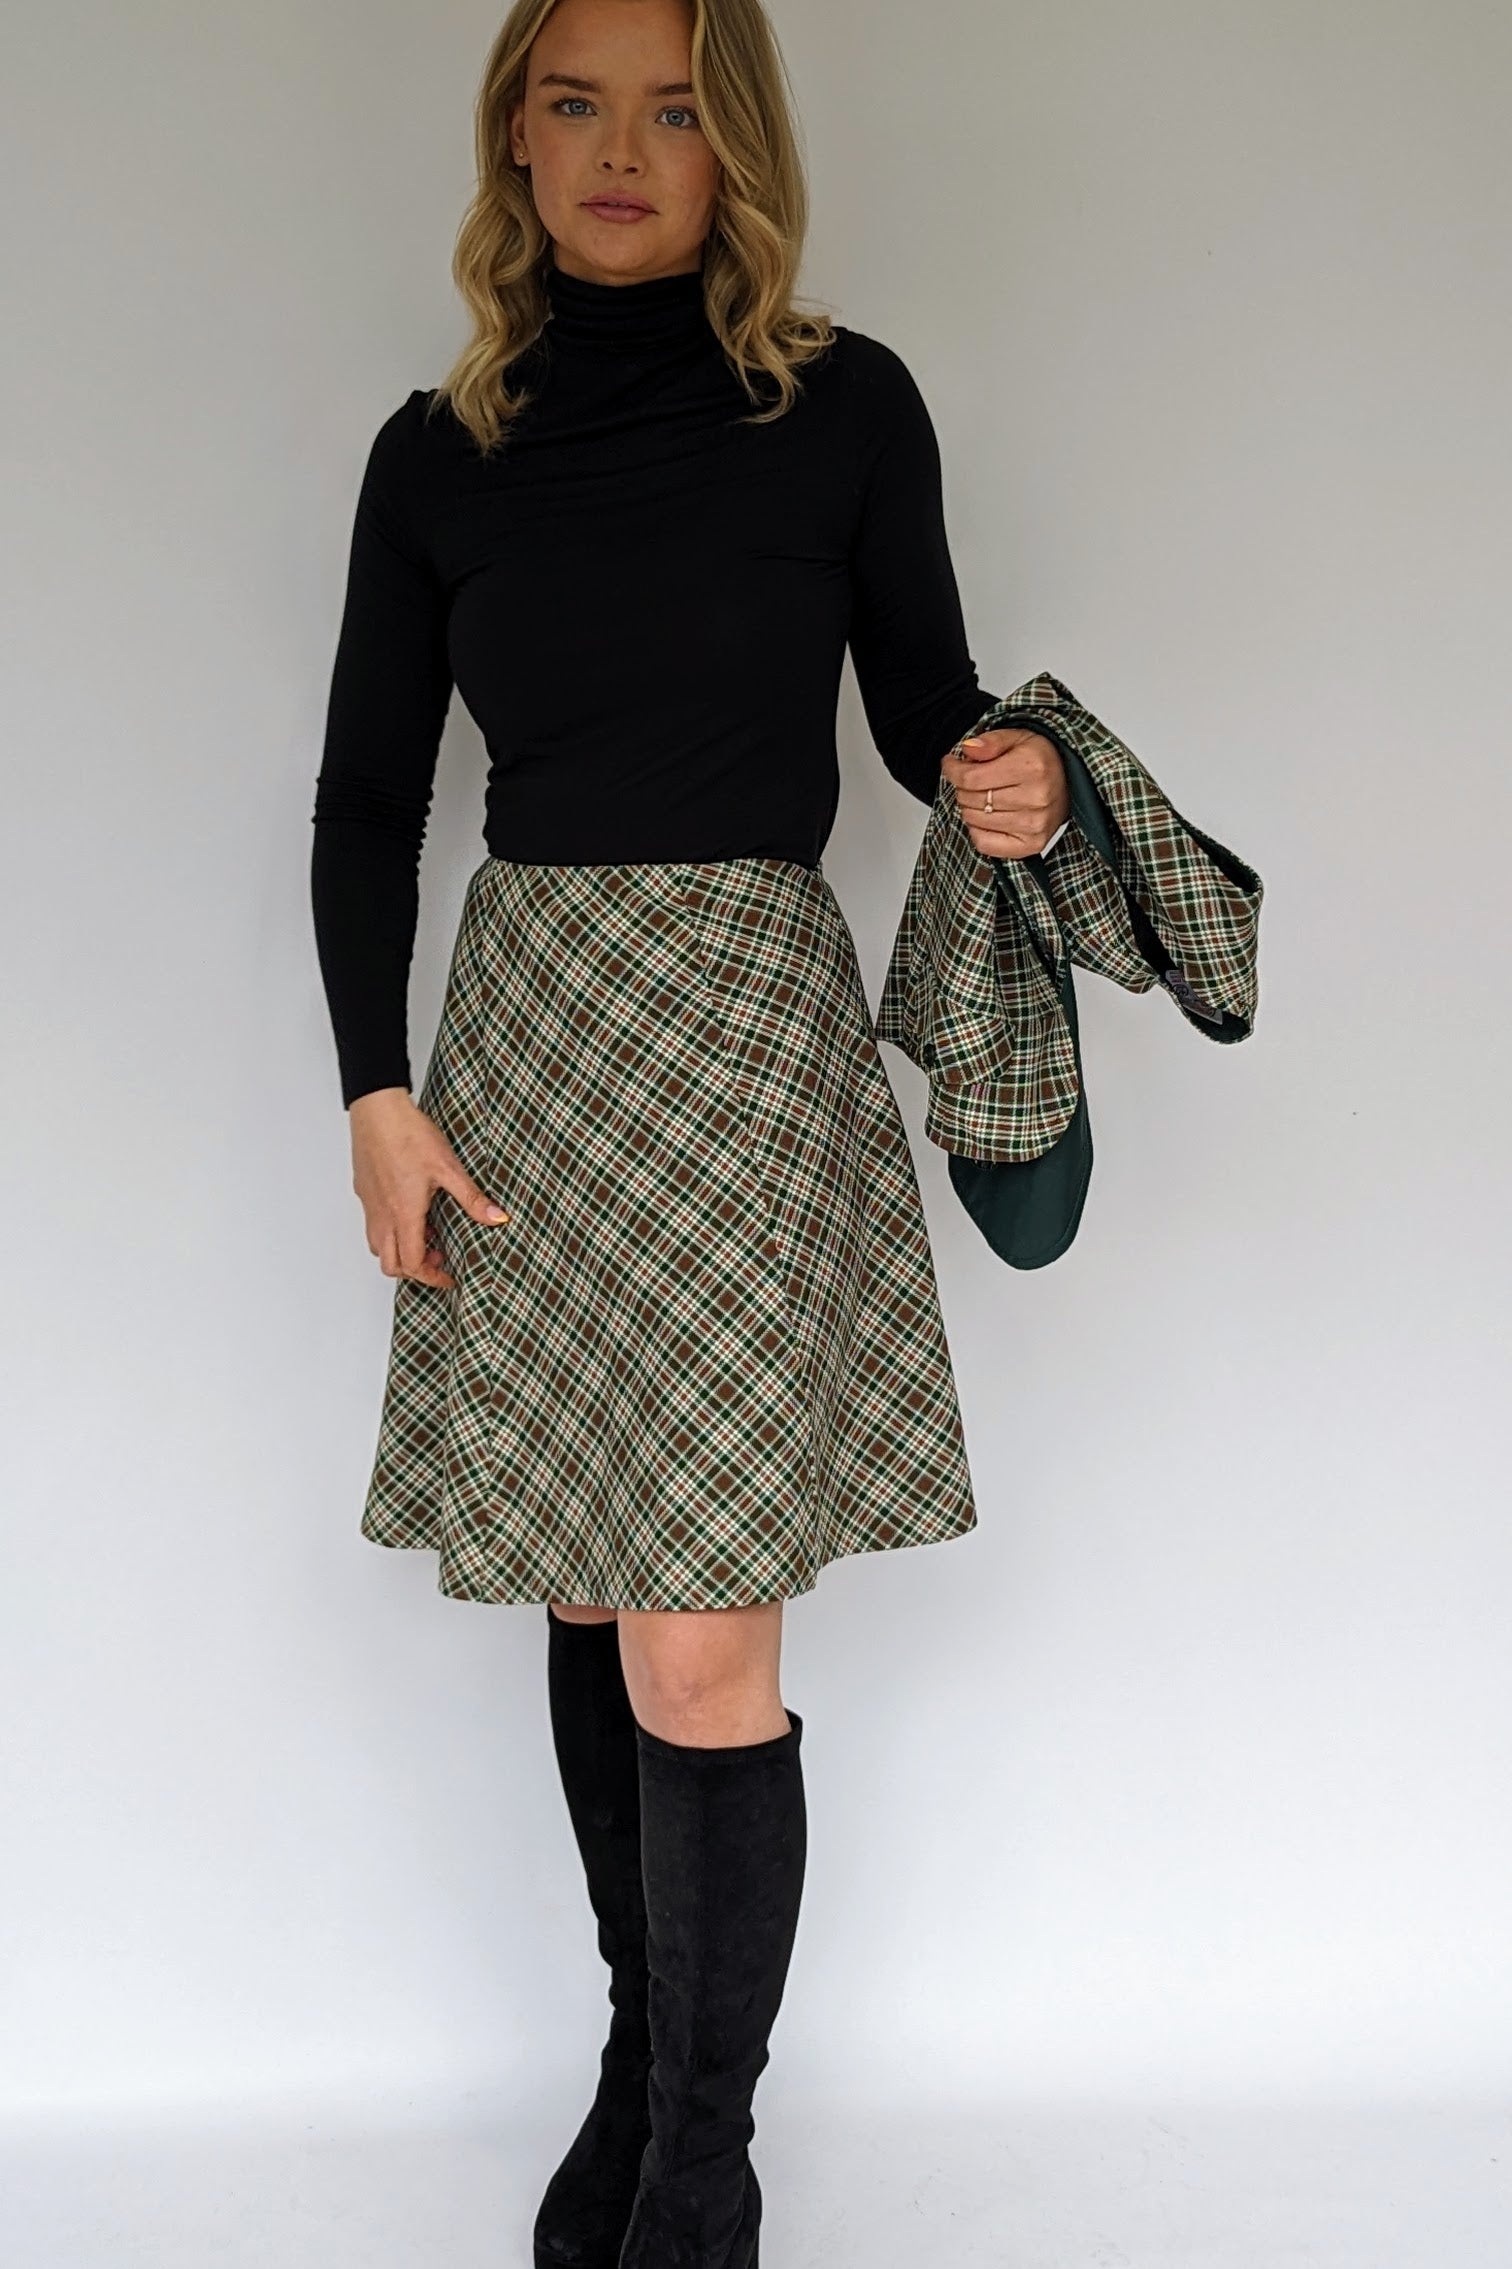 Plaid check skirt suit from 1970s 